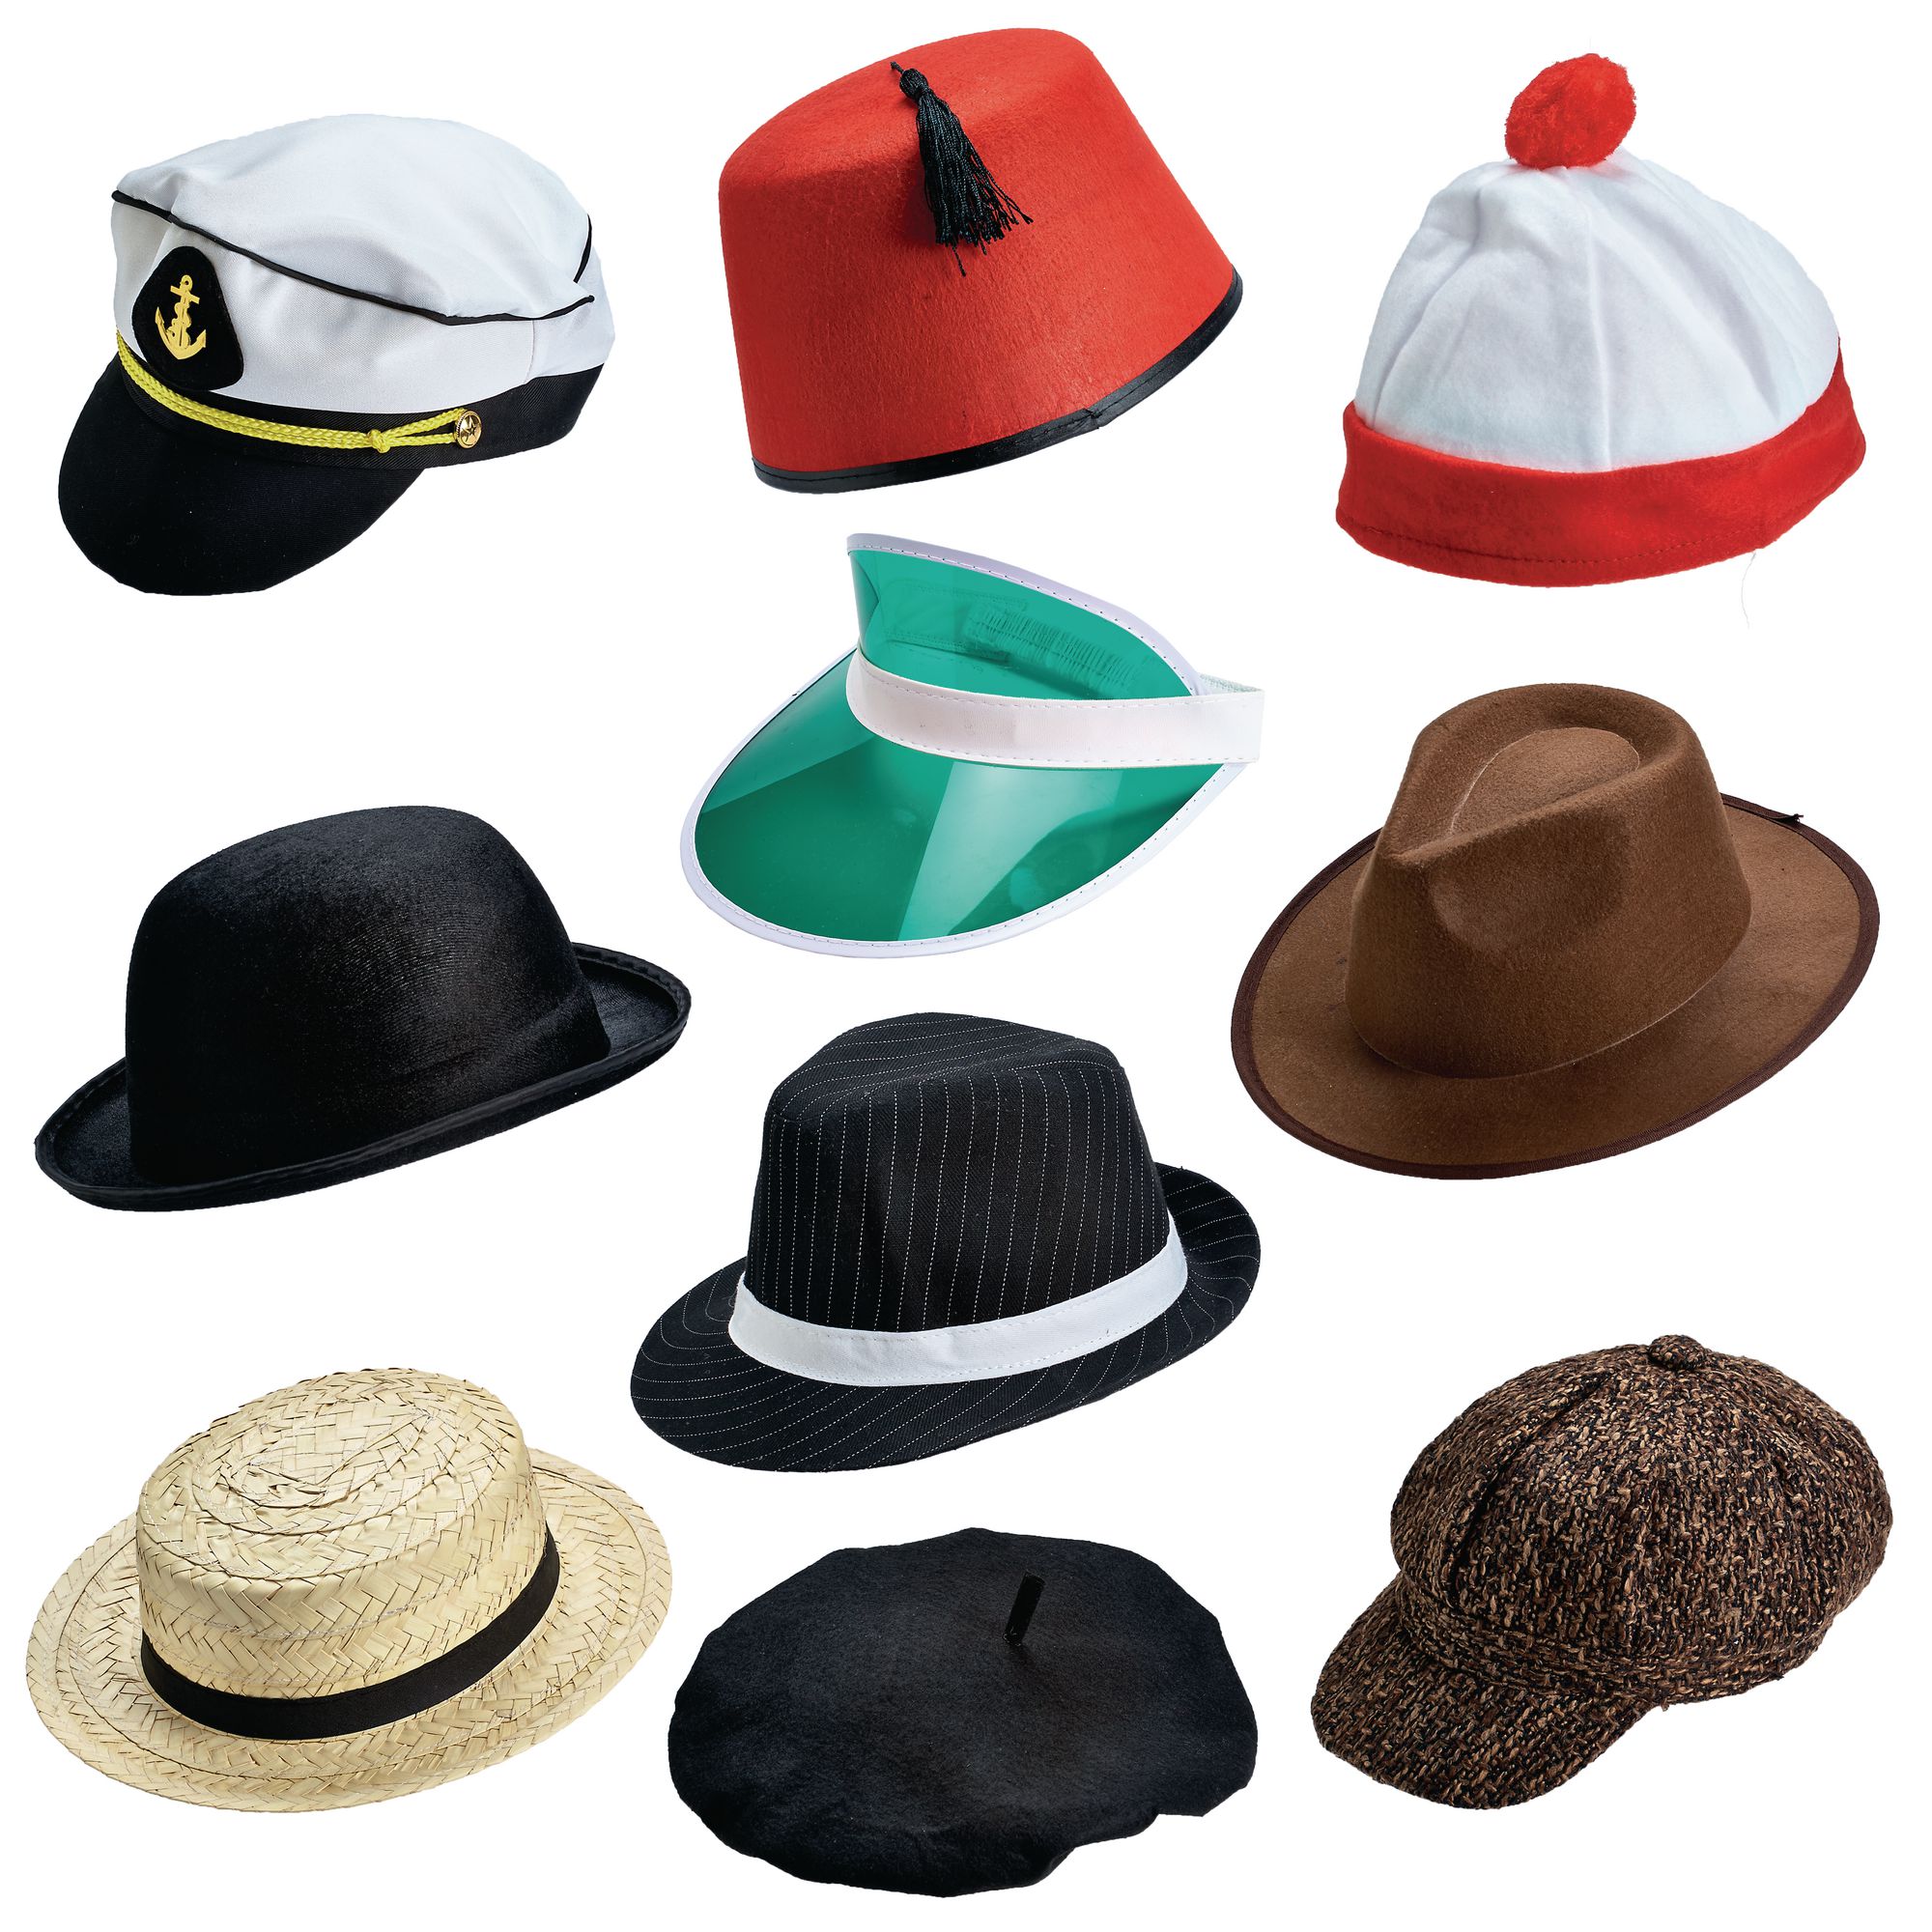 Hats and Accessories Set